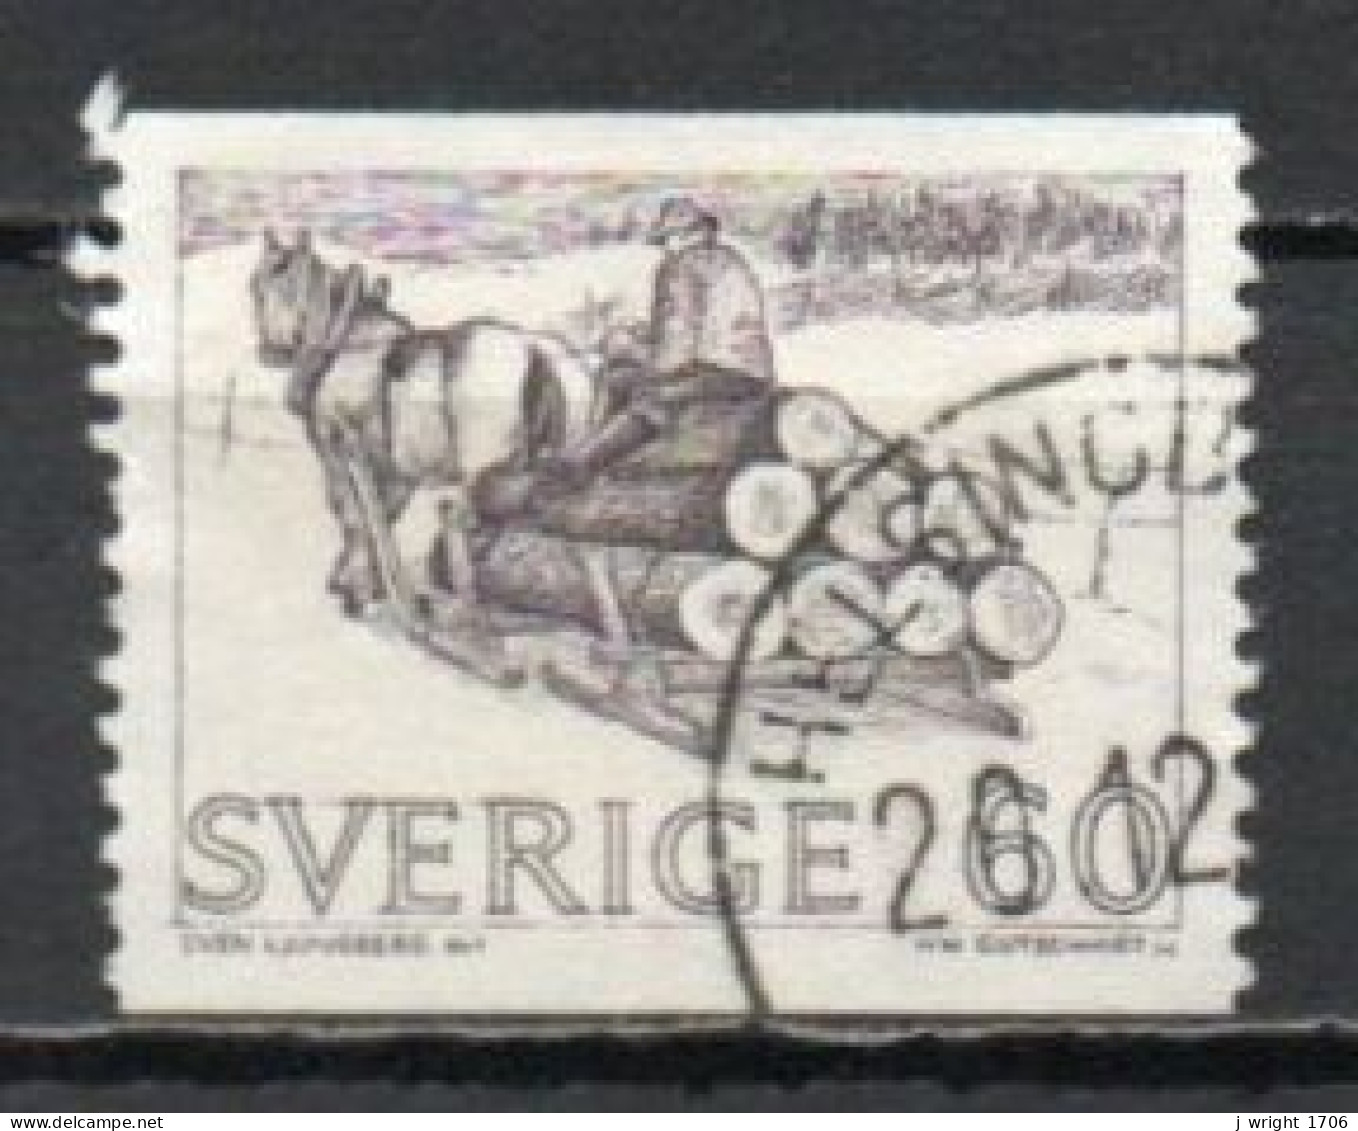 Sweden, 1971, Timber Sled, 60ö, USED - Used Stamps